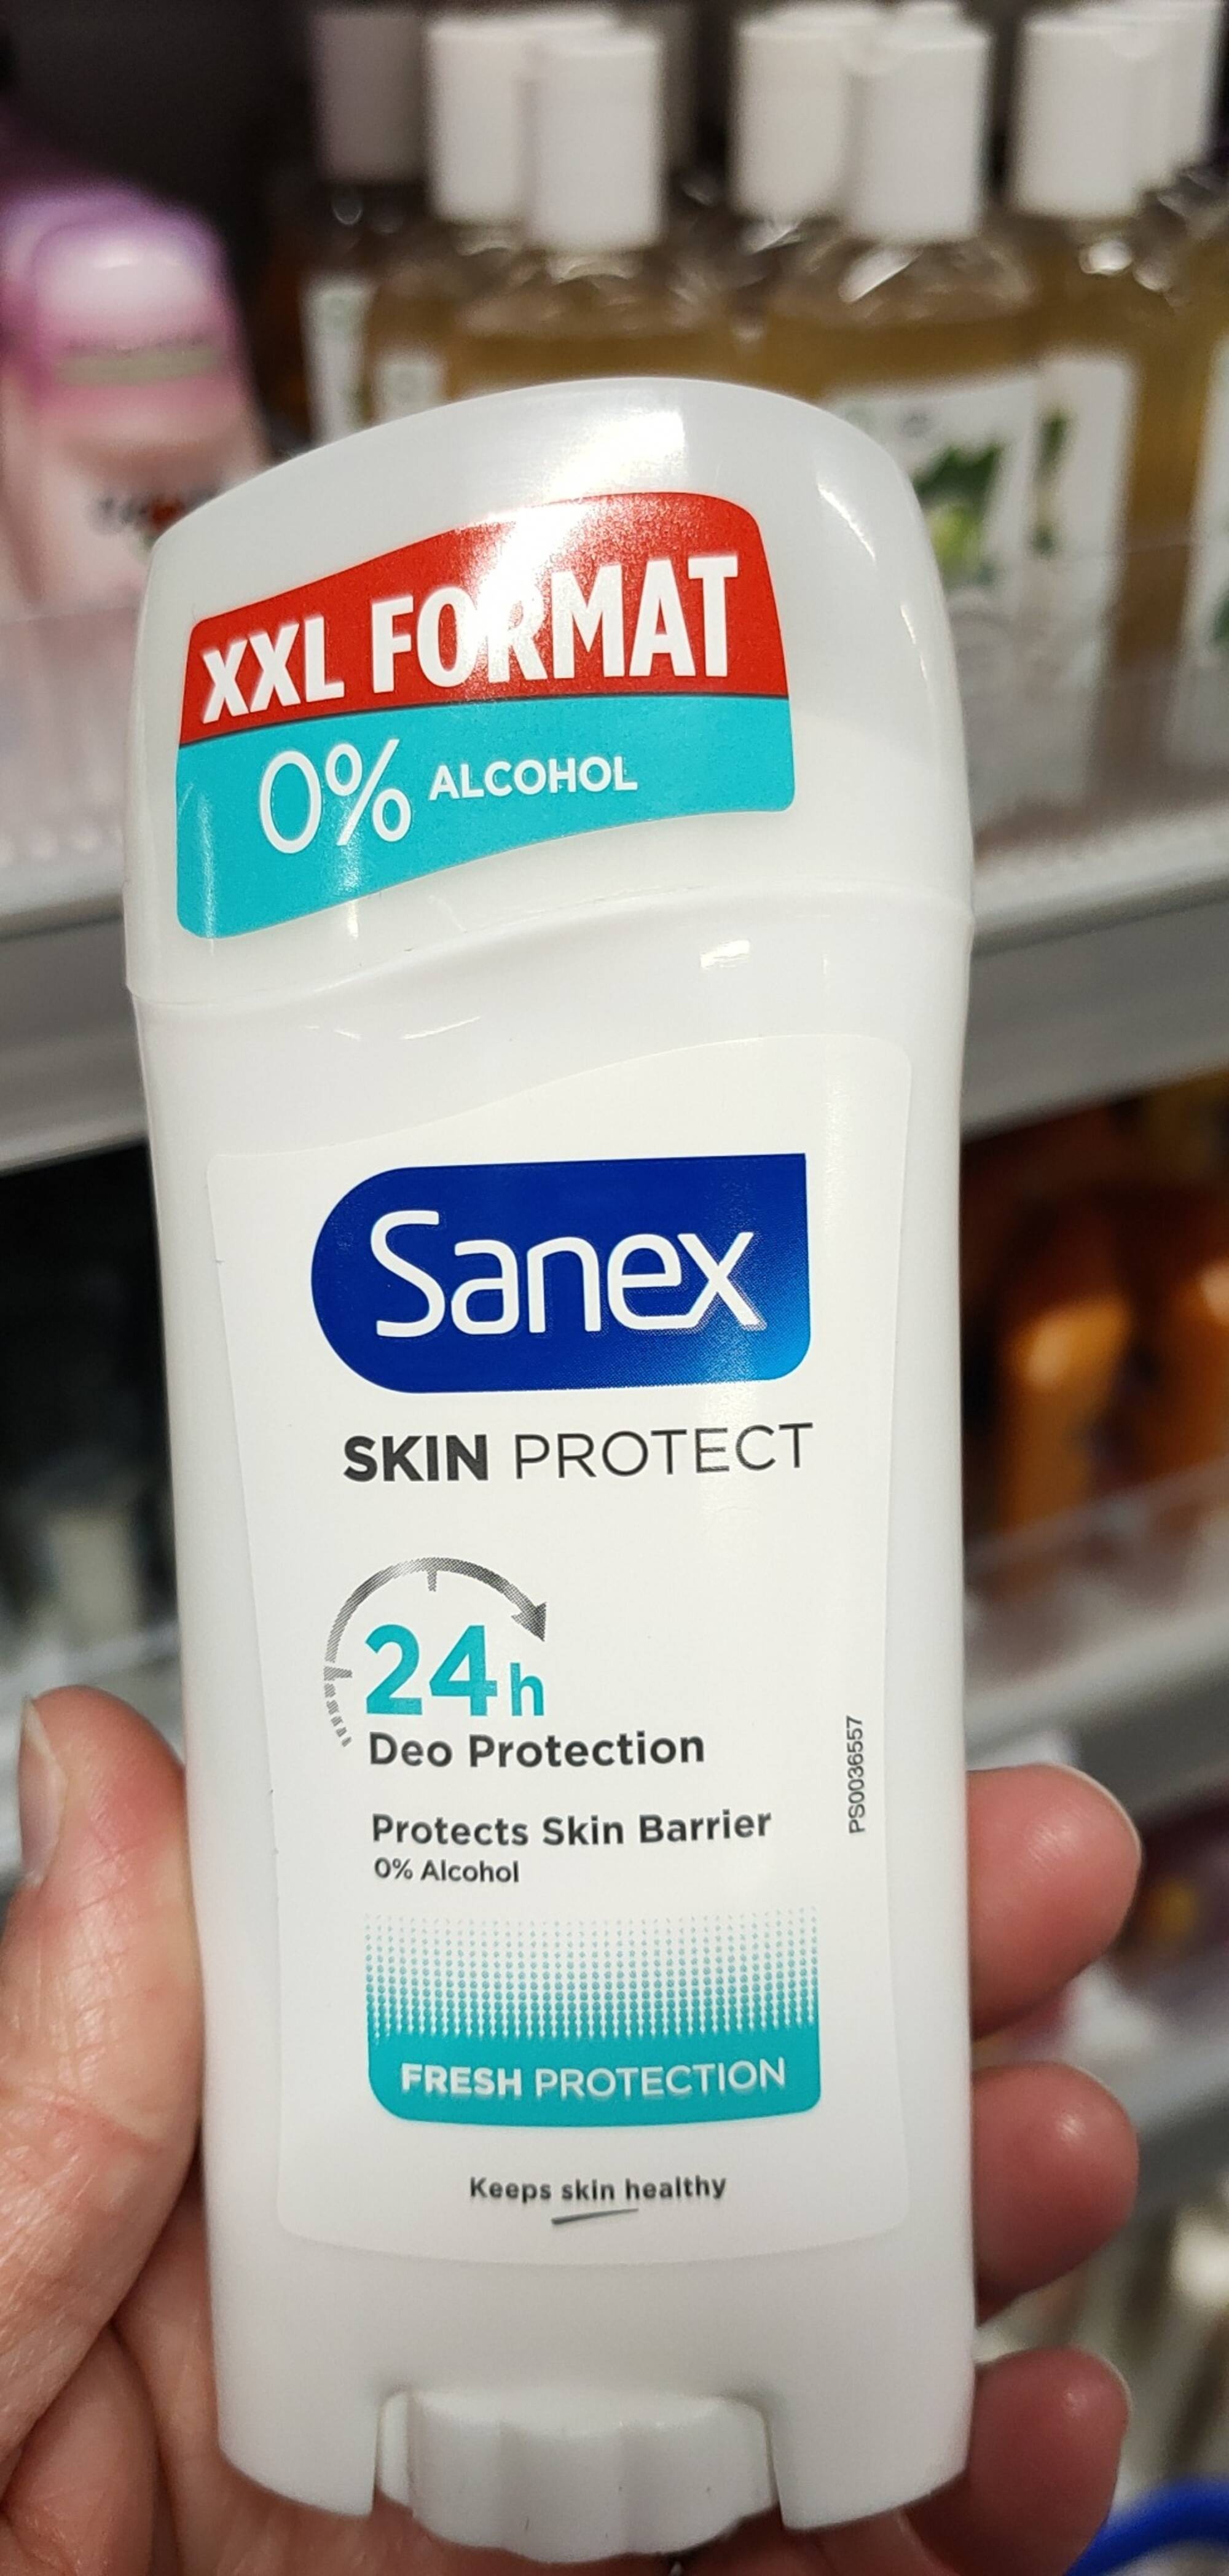 SANEX - Skin protect - 24h deo protection